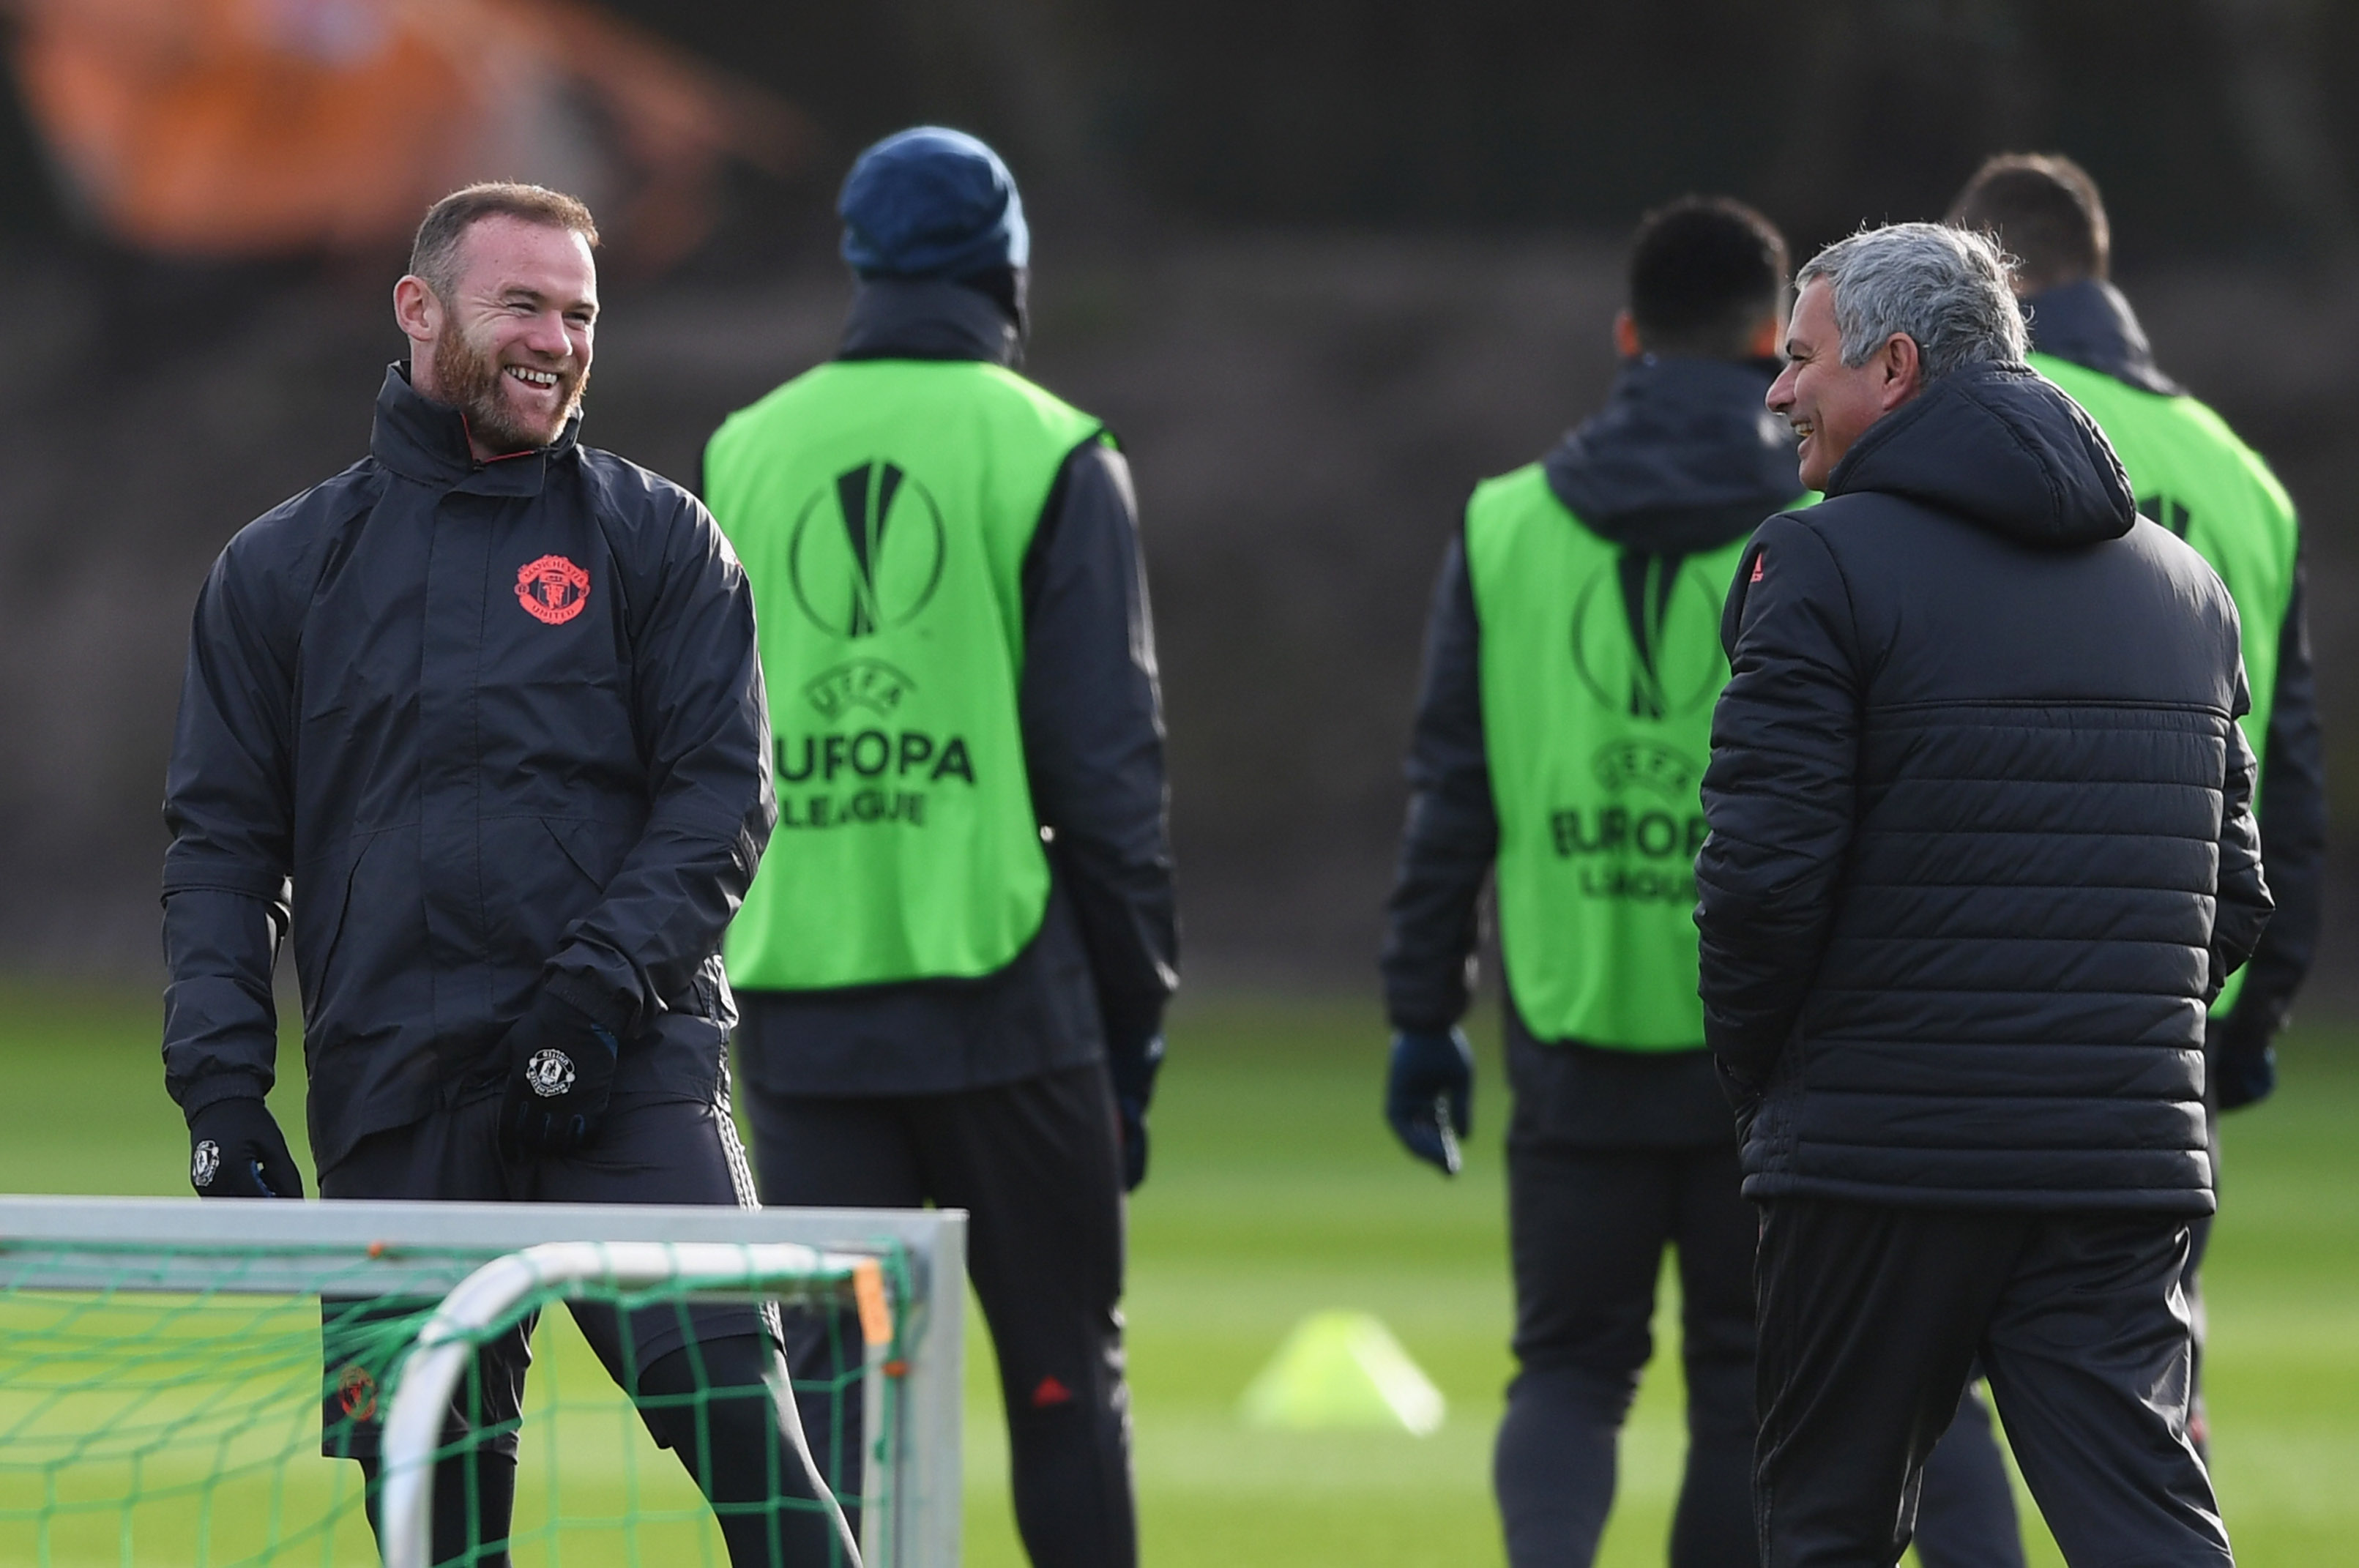 MANCHESTER, ENGLAND - NOVEMBER 23:  Wayne Rooney and Jose Mourinho manager of Manchester United smile during a Manchester United training session on the eve of their UEFA Europa League match against Feyenoord at Aon Training Complex on November 23, 2016 in Manchester, England.  (Photo by Gareth Copley/Getty Images)